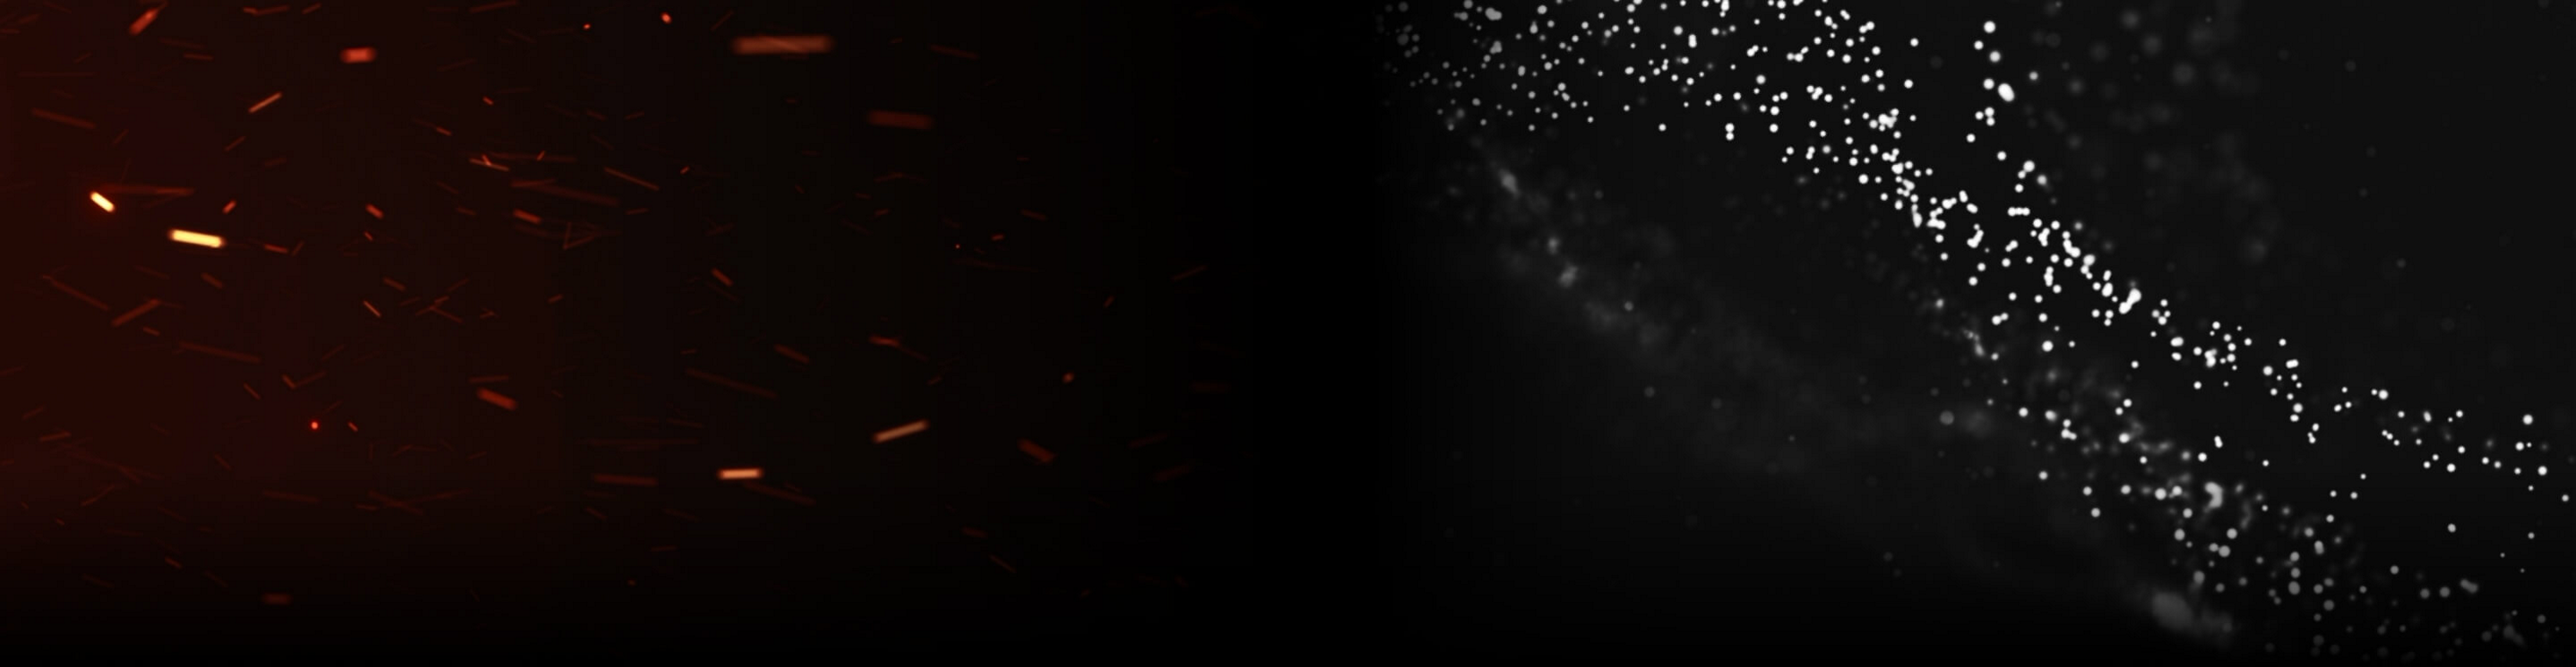 Sparks and particles on a black background.